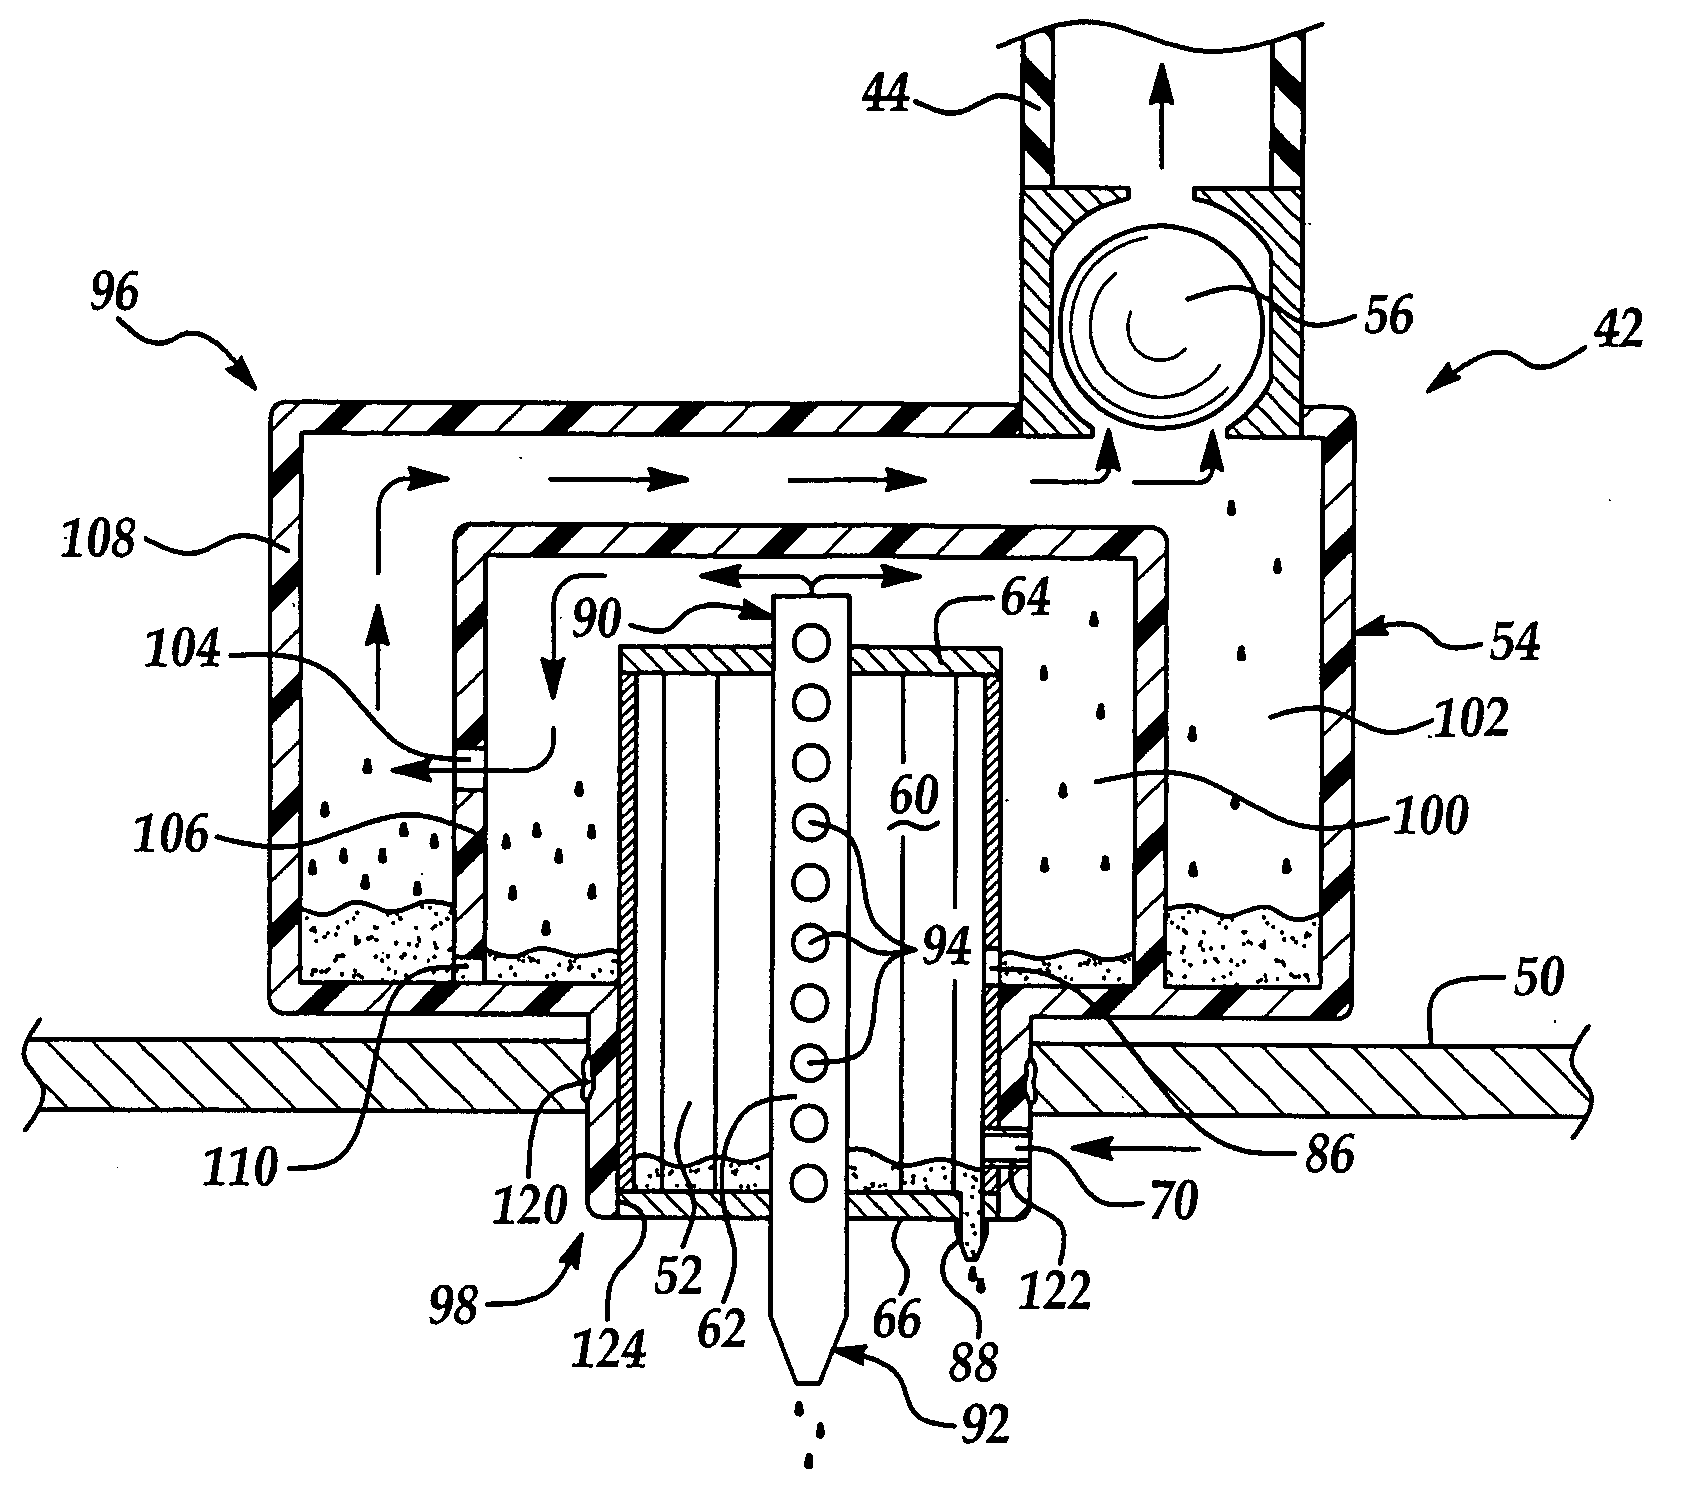 Air/oil separating device